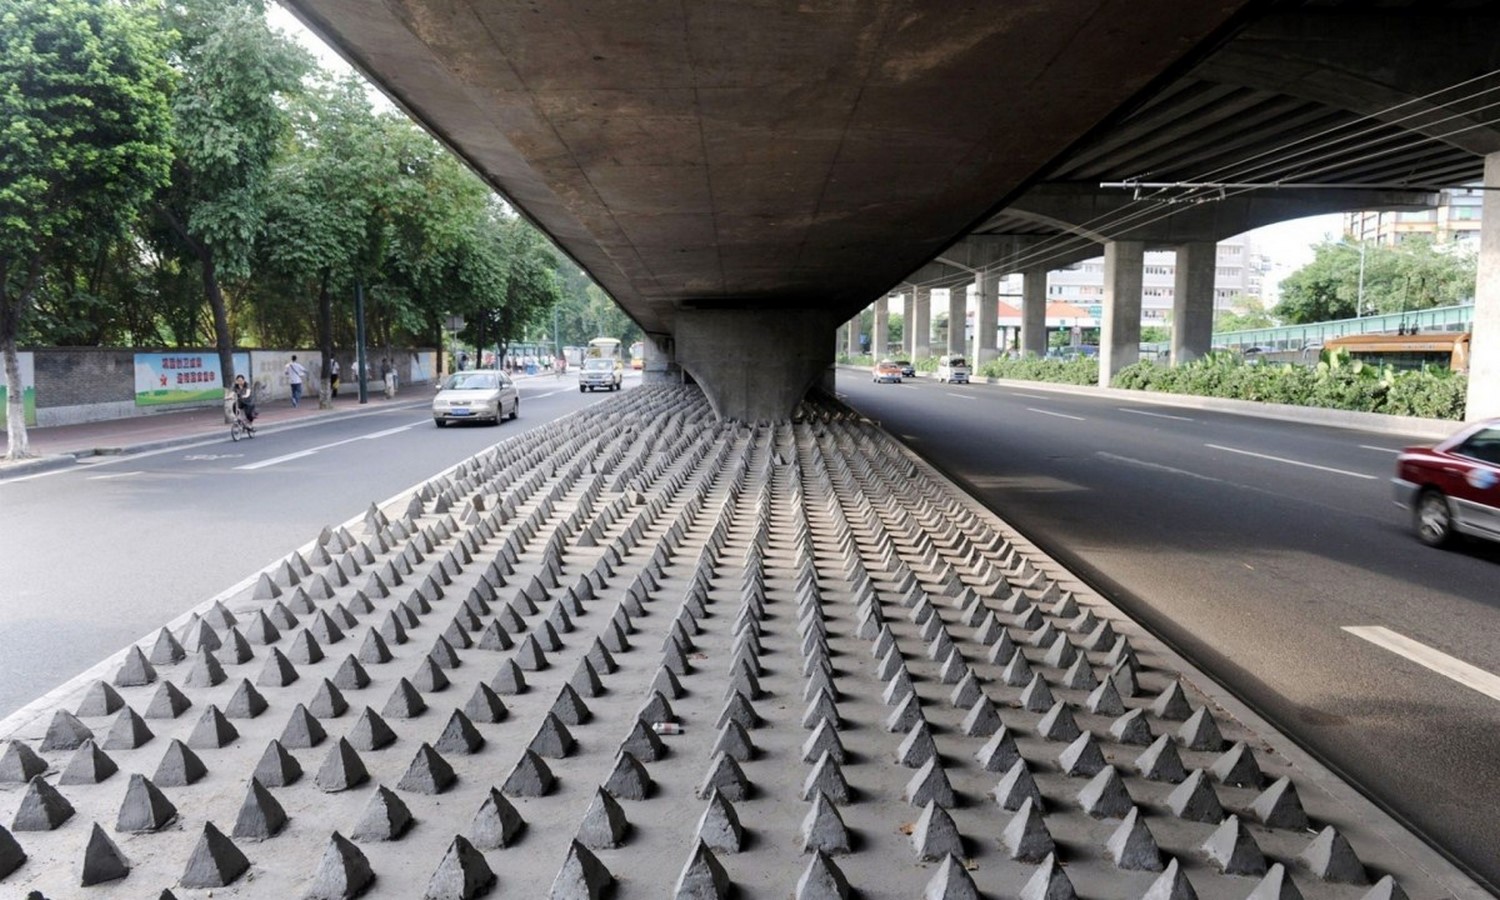 Hostile Architecture - Under-road spikes in Guangzhou, China- Sheet1